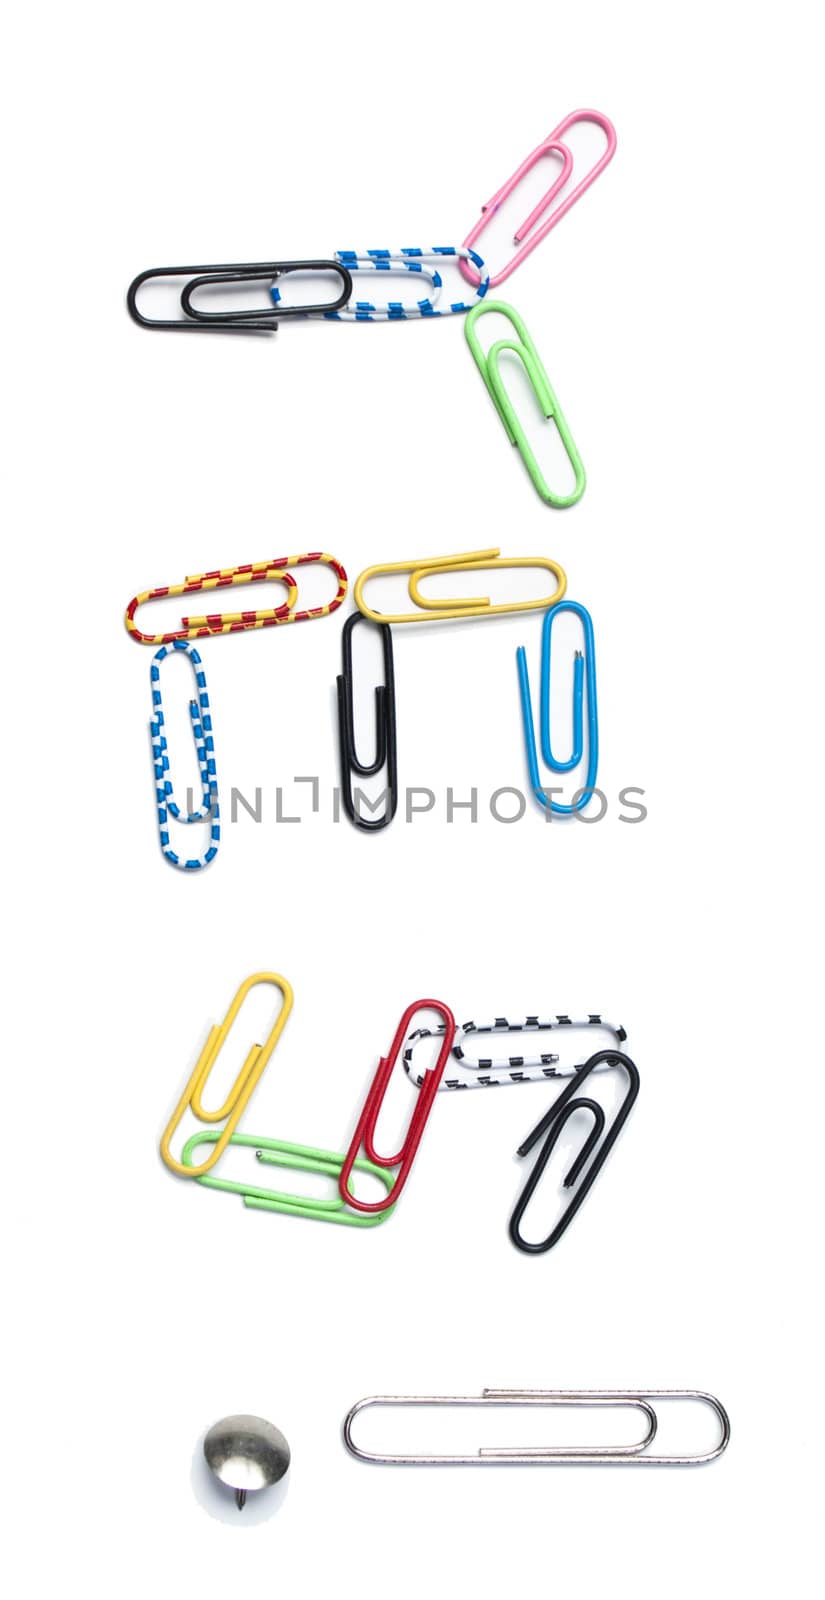 Word "Yes!" from paper clips